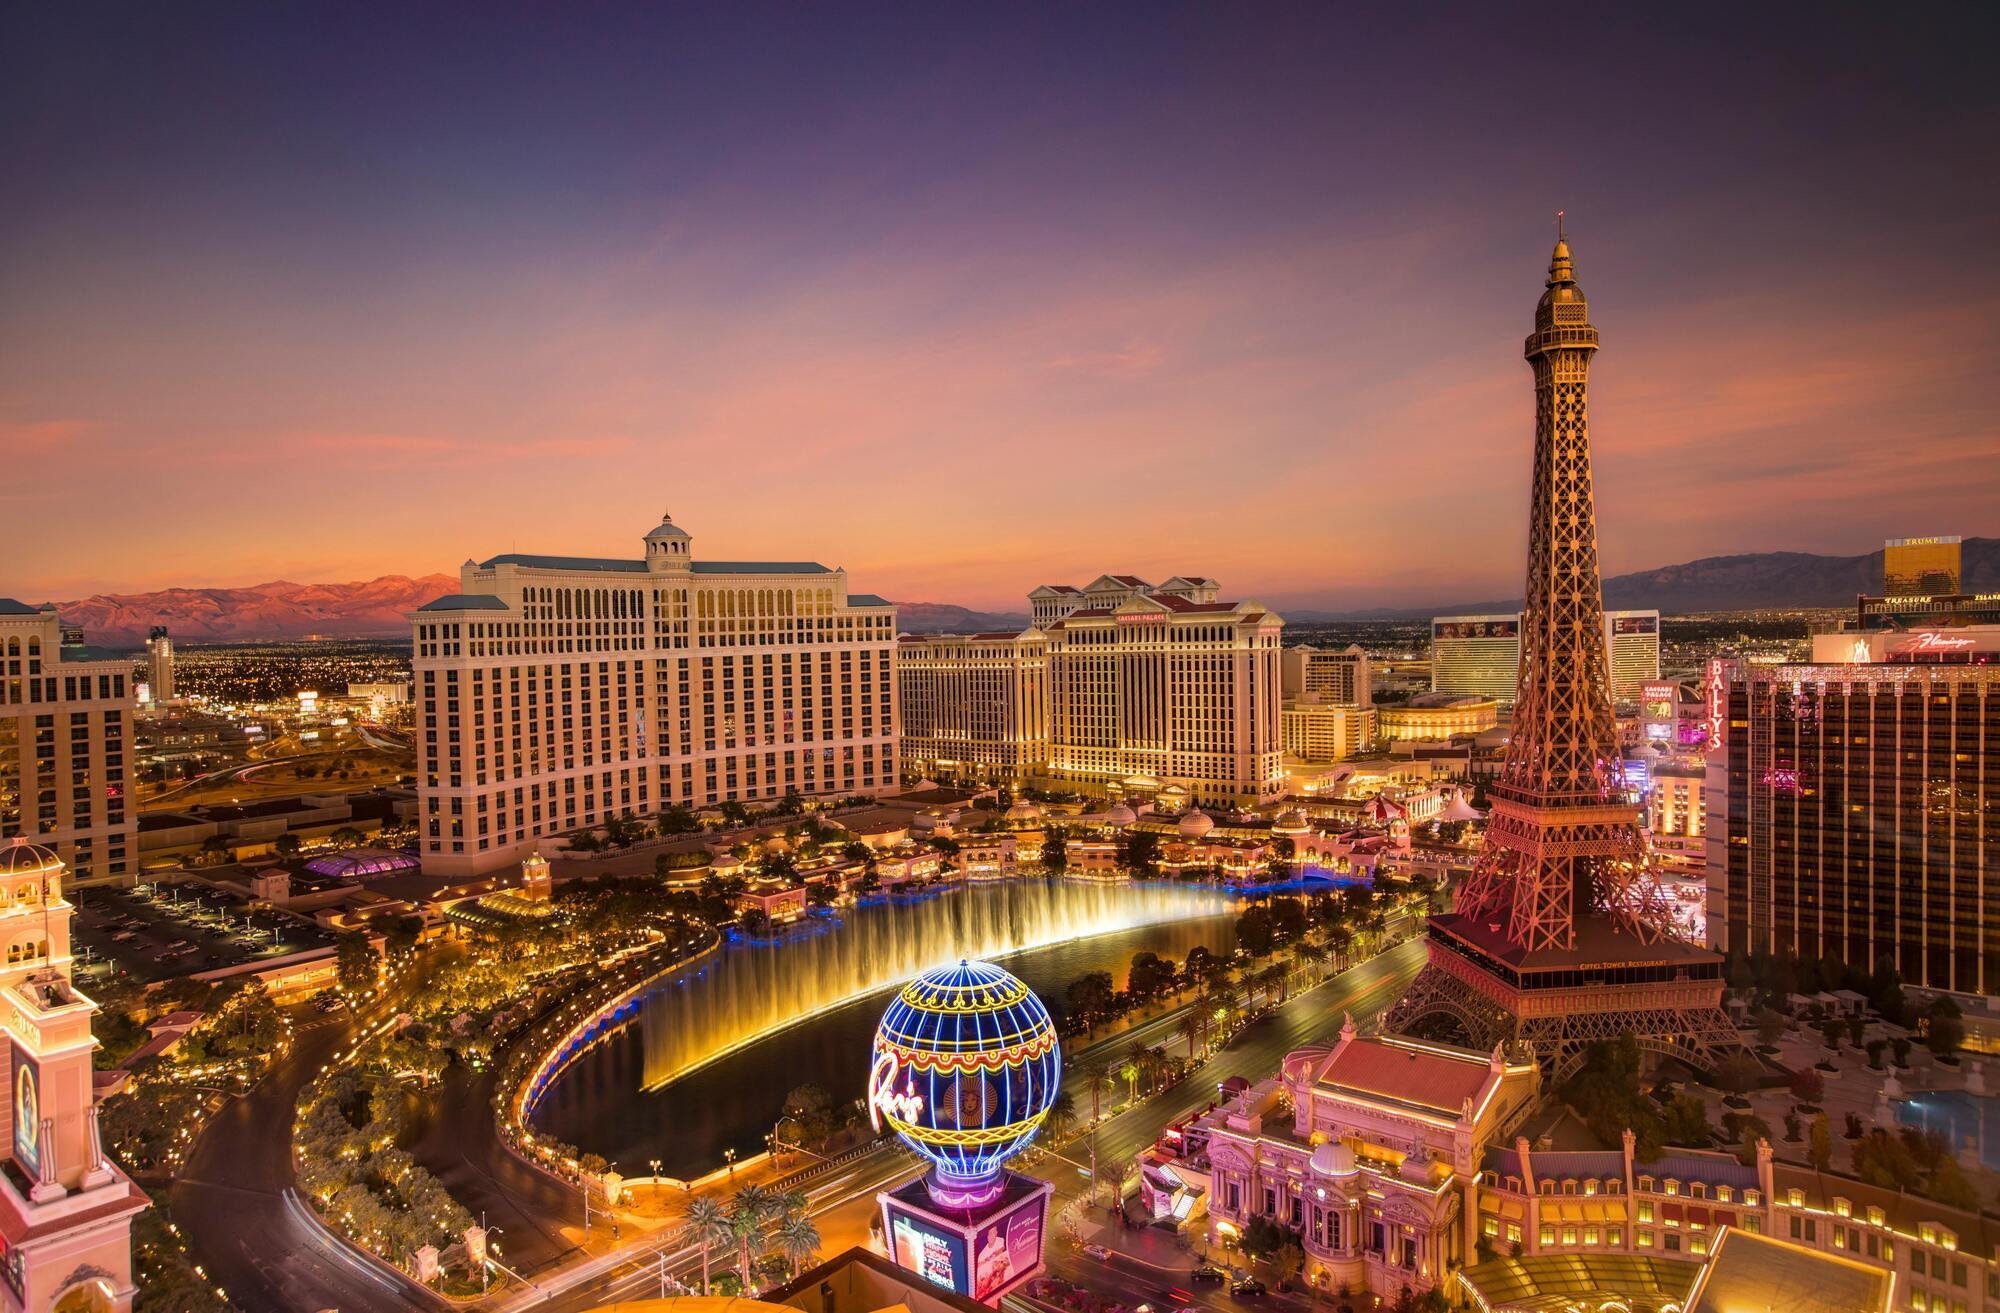 Top 16 Las Vegas hotels for fantastic vacations and weekends: from Venetian palaces to grandiose pyramids with royal suites